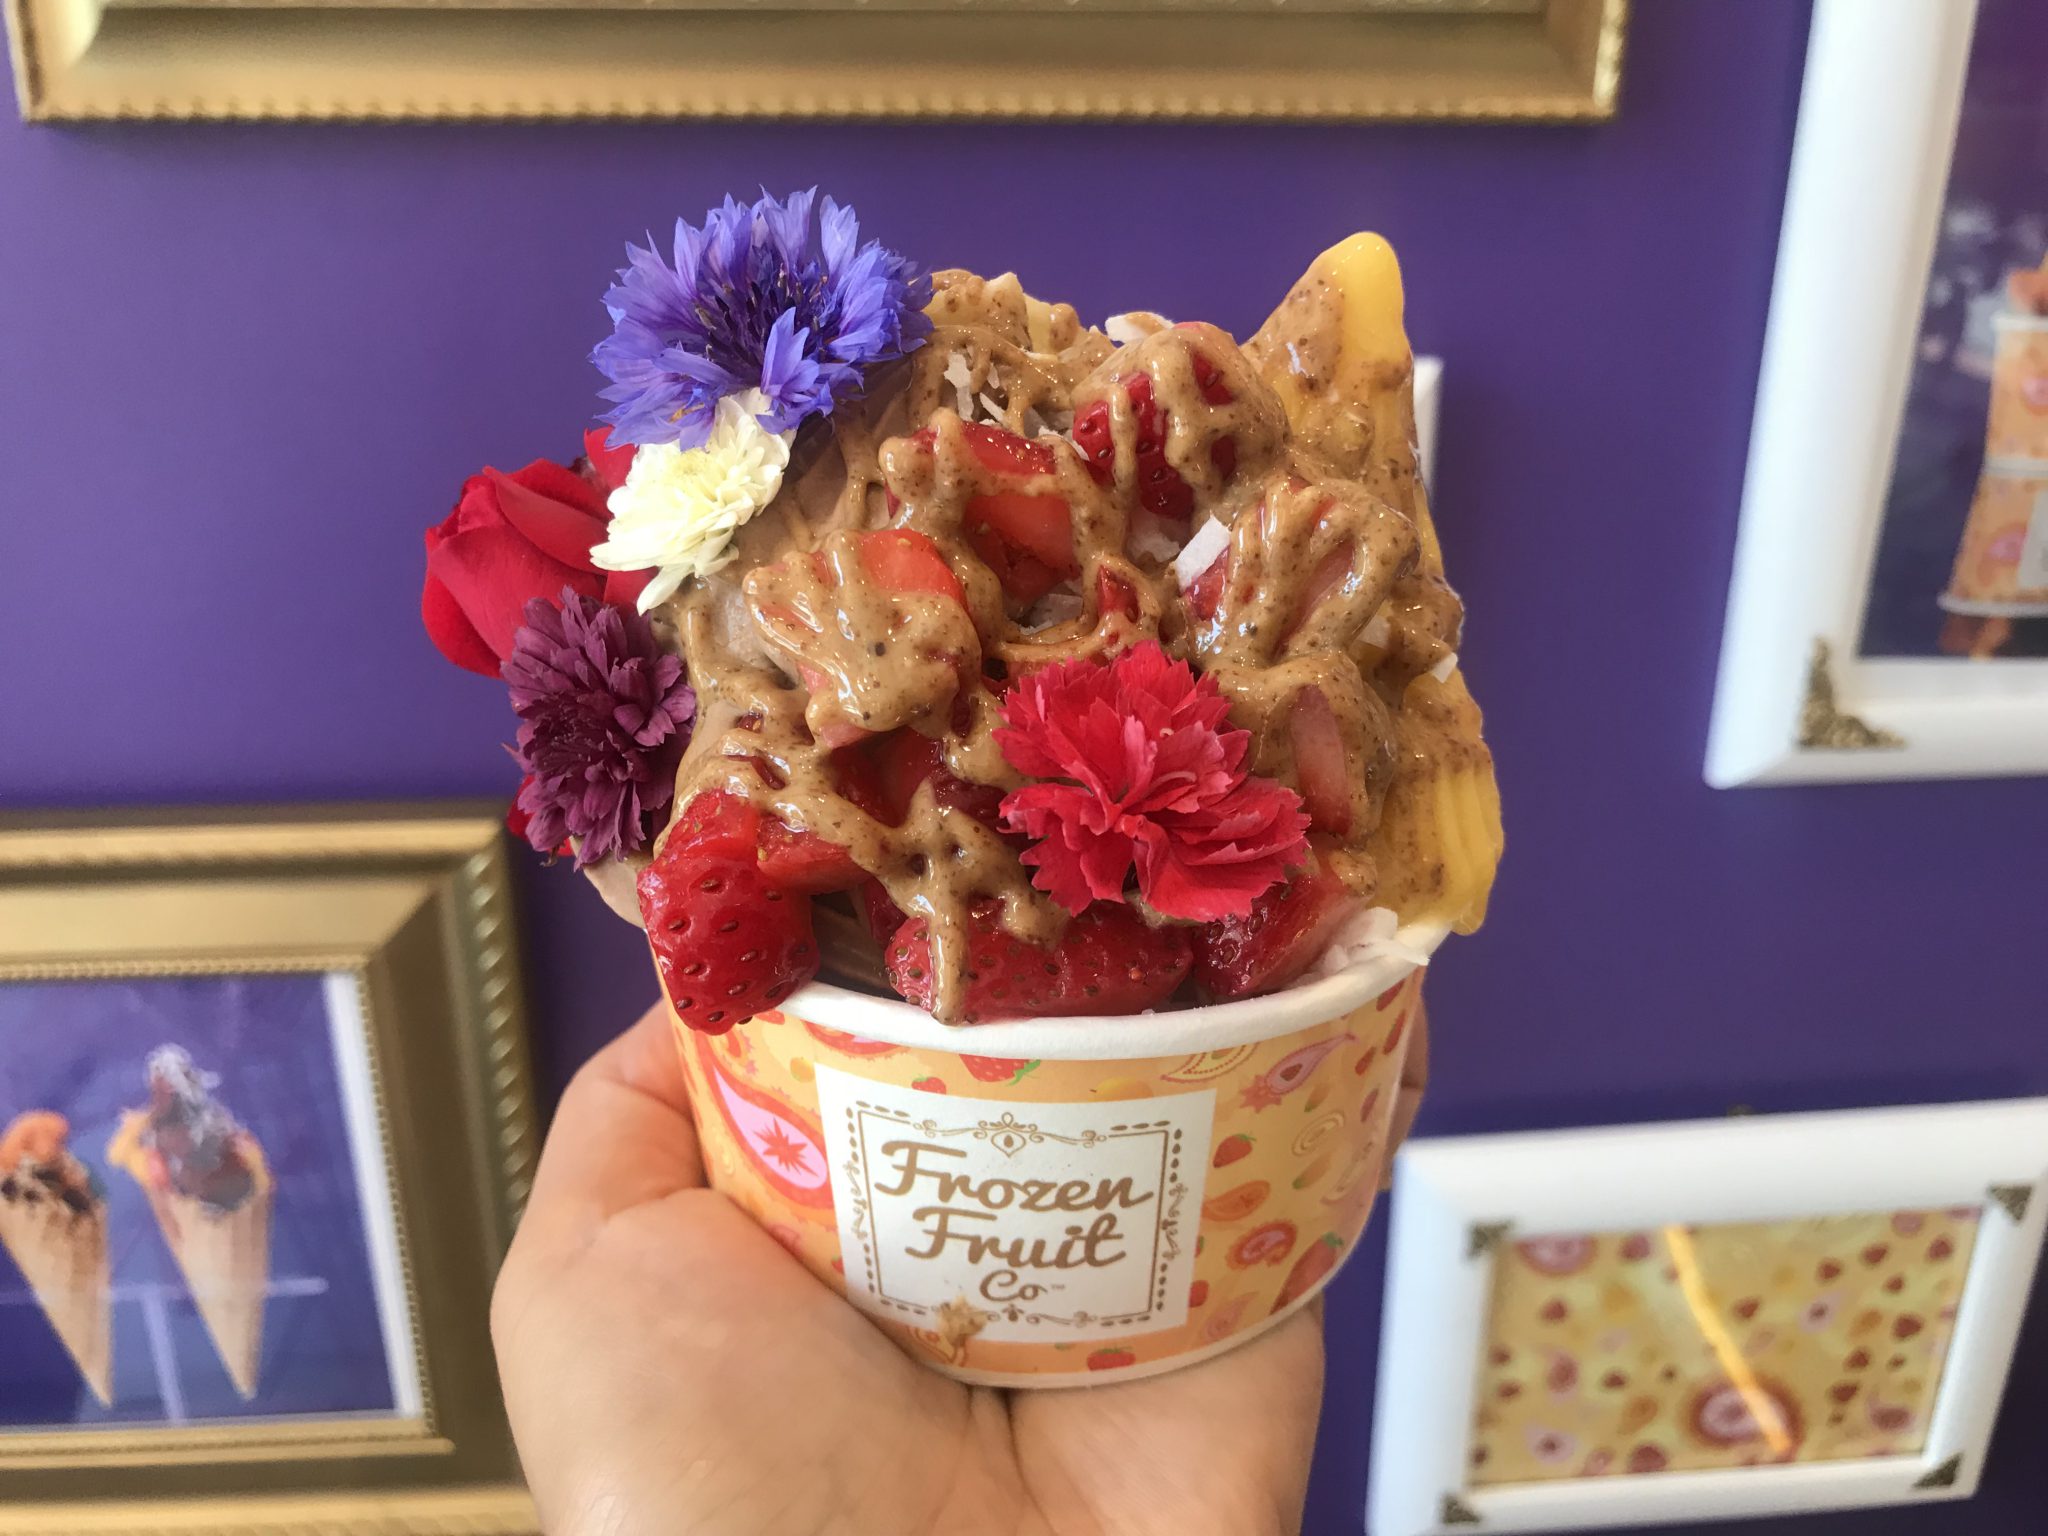 Frozen Fruit Co: Vegan Ice Cream and a Floral Arrangement all in ONE!!! | Jane Unchained News